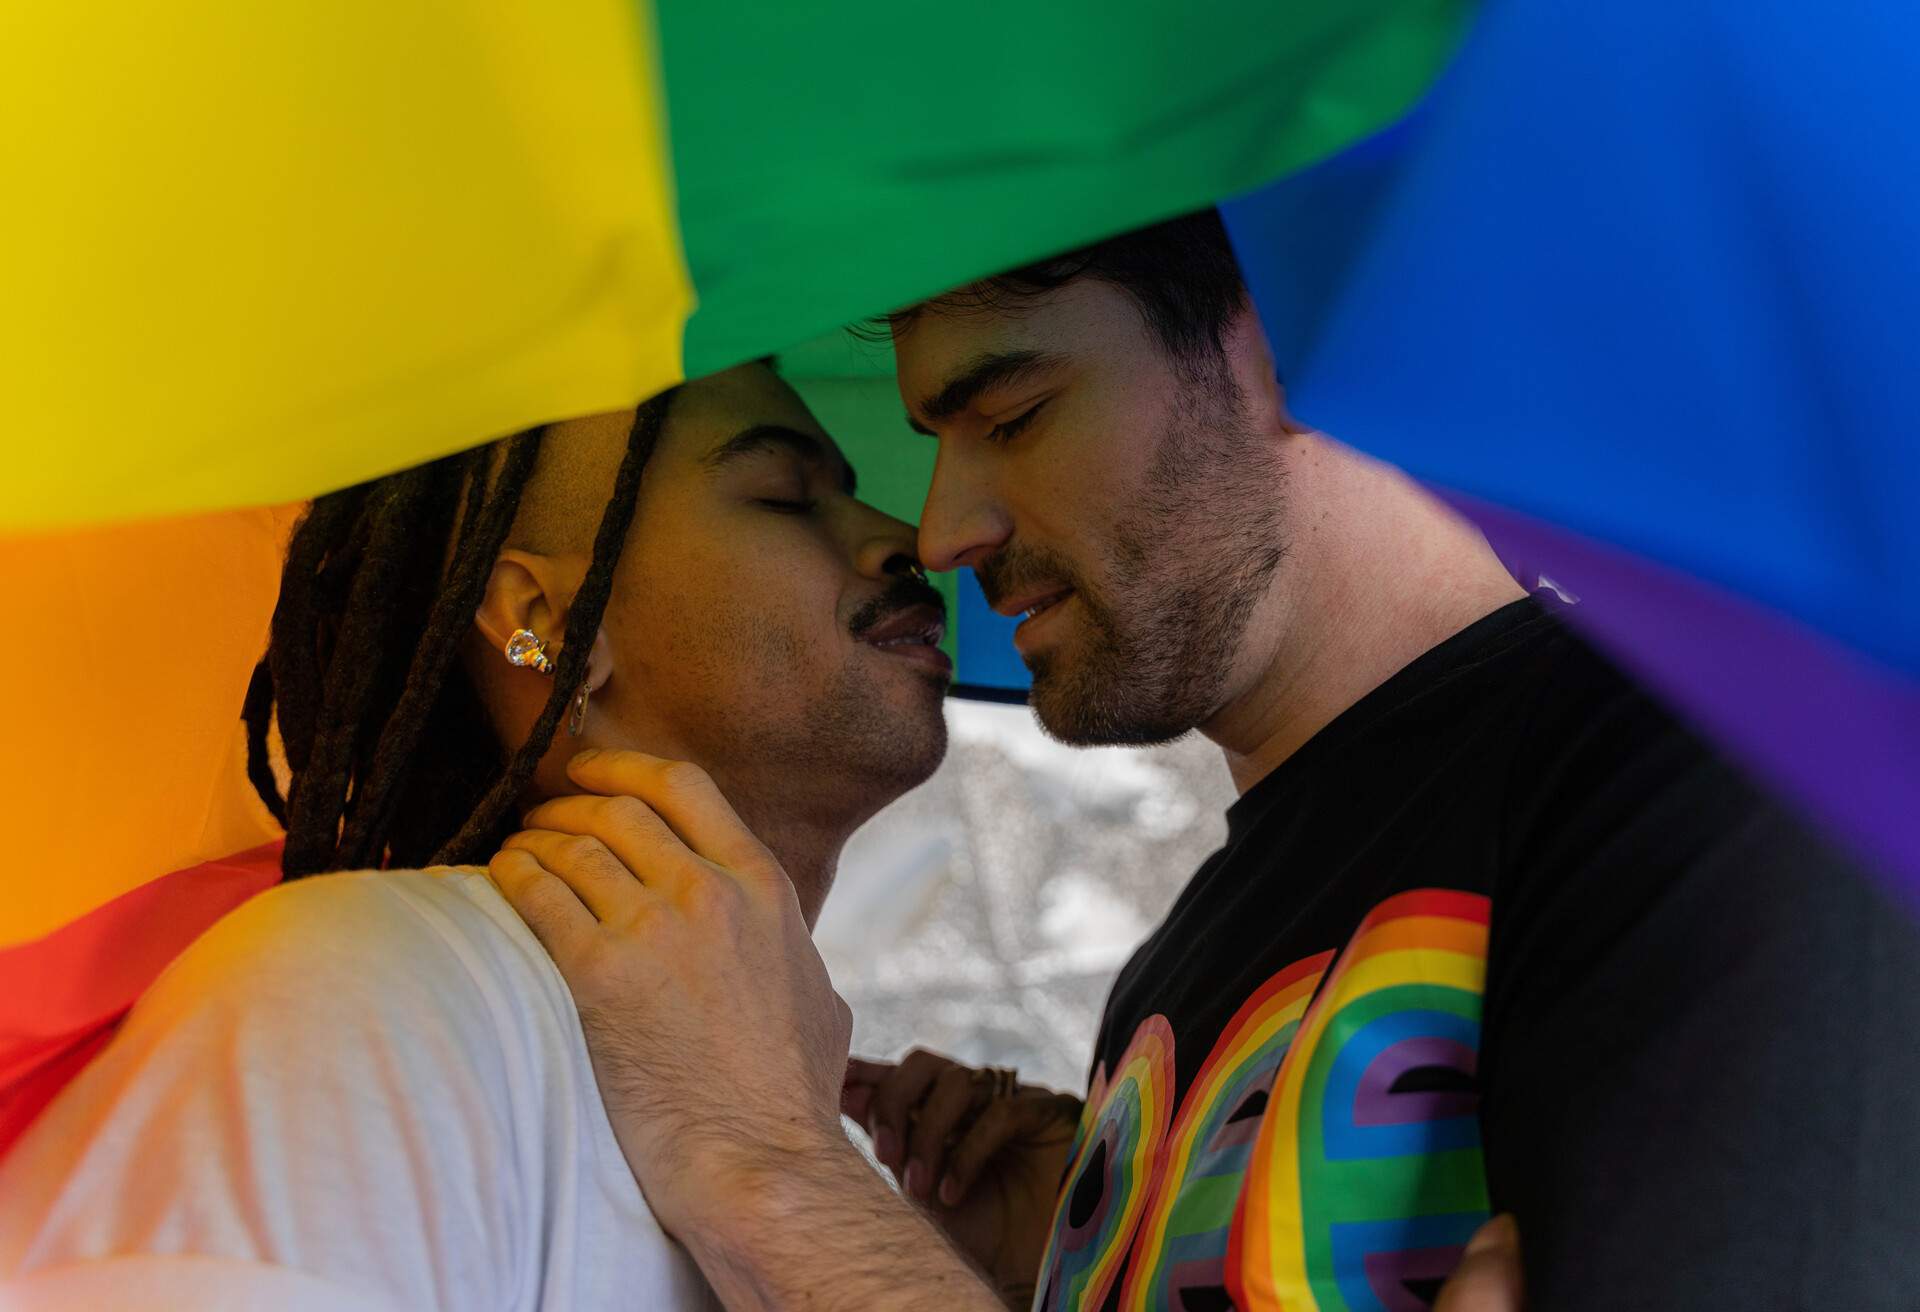 A gay couple poised to kiss under the pride flag.